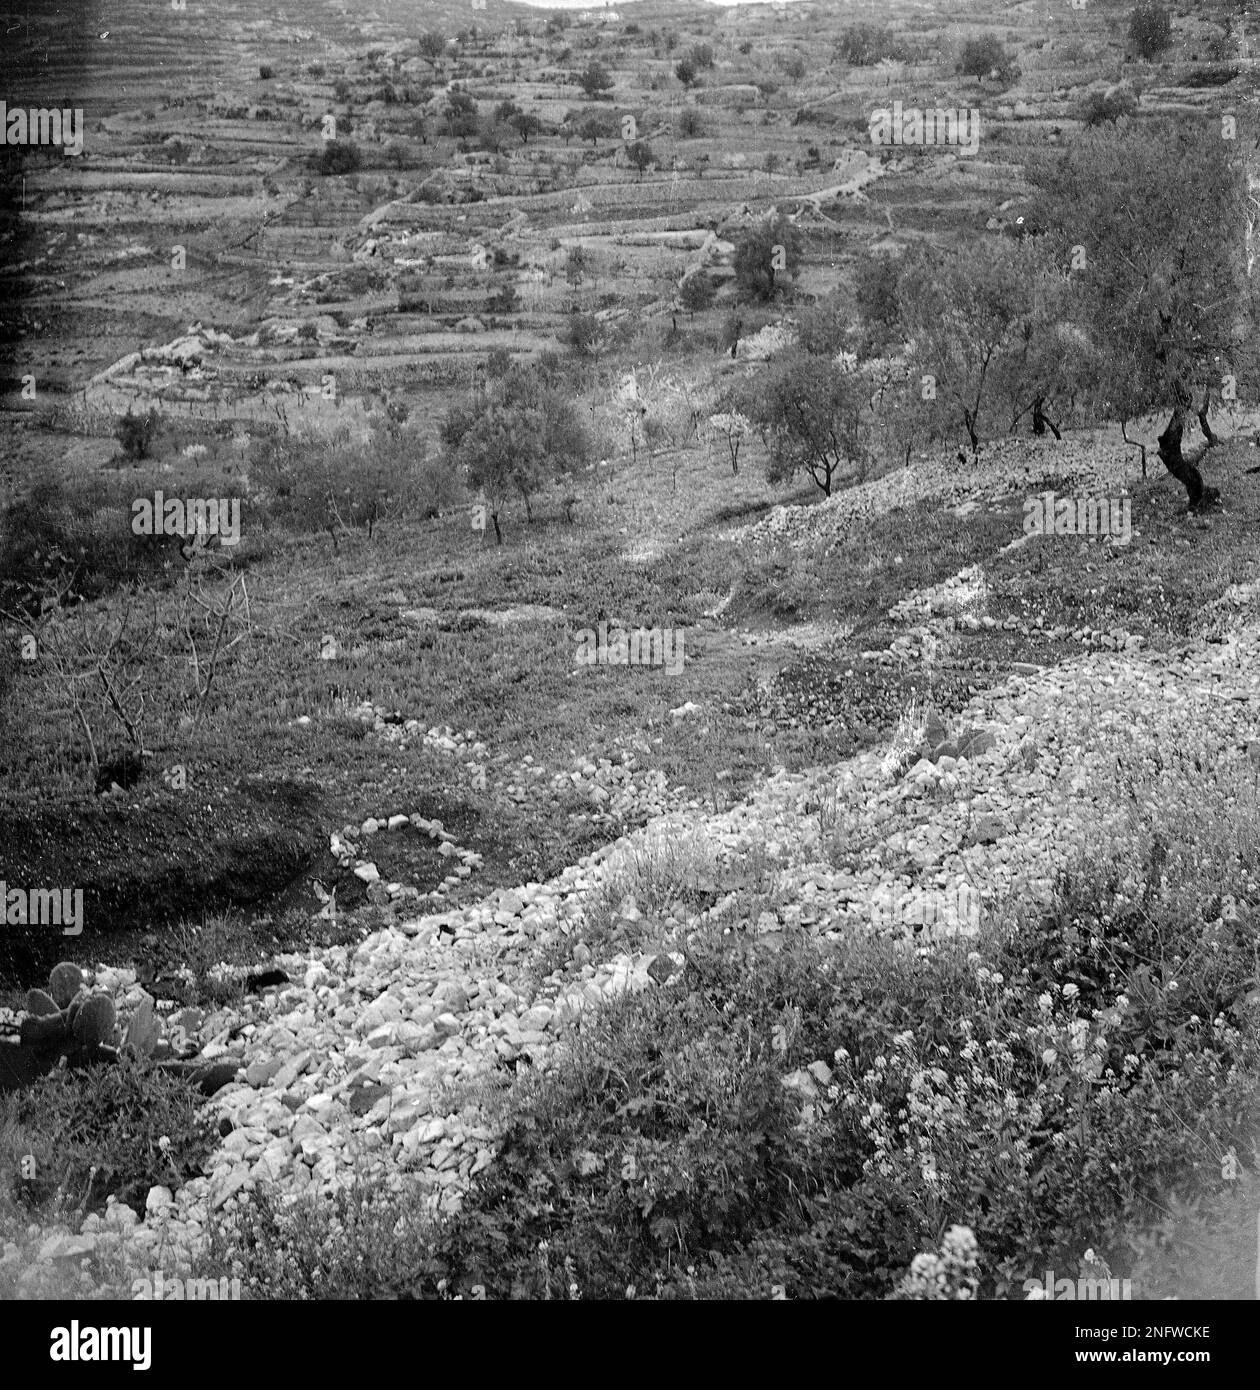 This is a mass grave used to bury 104 victims of the Deir Yassin massacre, April 1948. The round stone ring is a mass grave filled with female victims, and the square is a common grave for the men. (AP Photo) Stock Photo